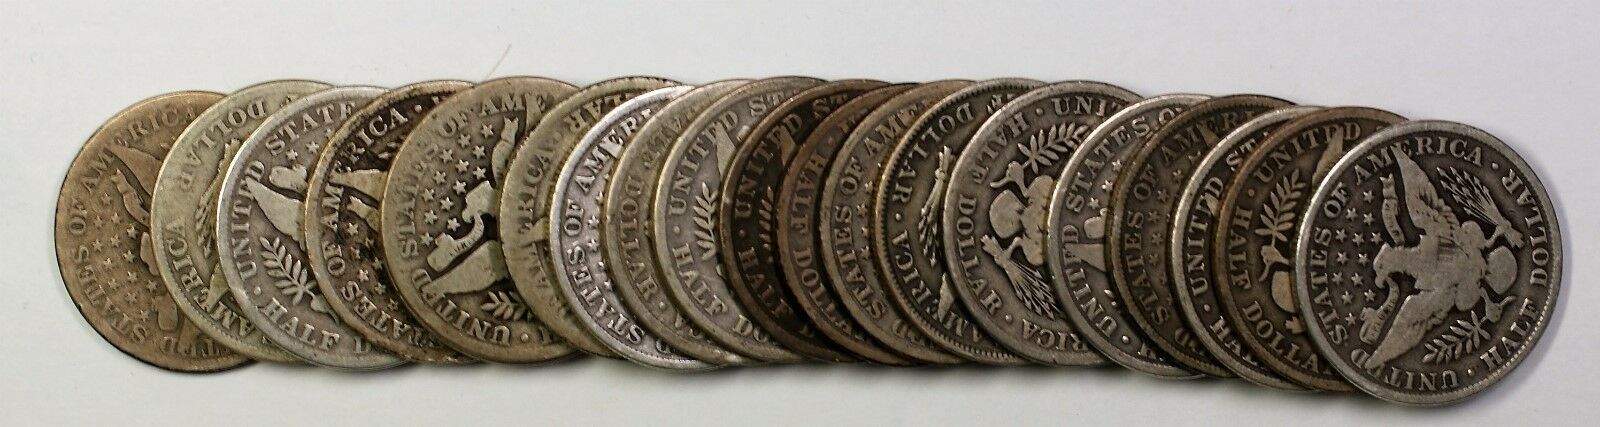 1907-D Barber Half Dollar 50c Roll 20 Circulated 90% Old Silver Coins Lot